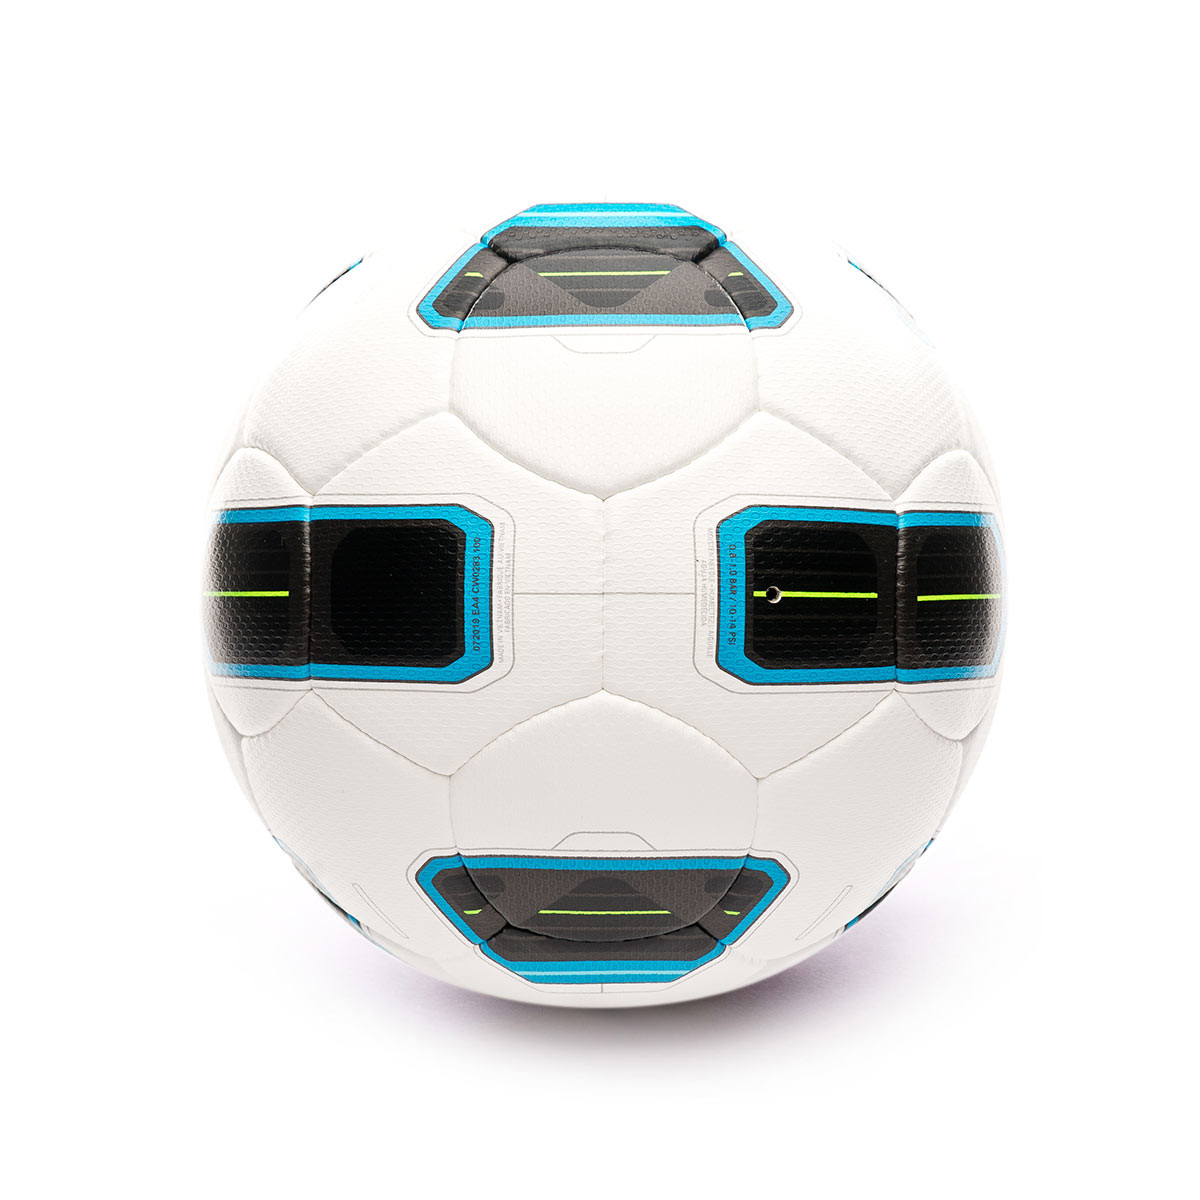 nike t90 tracer ball